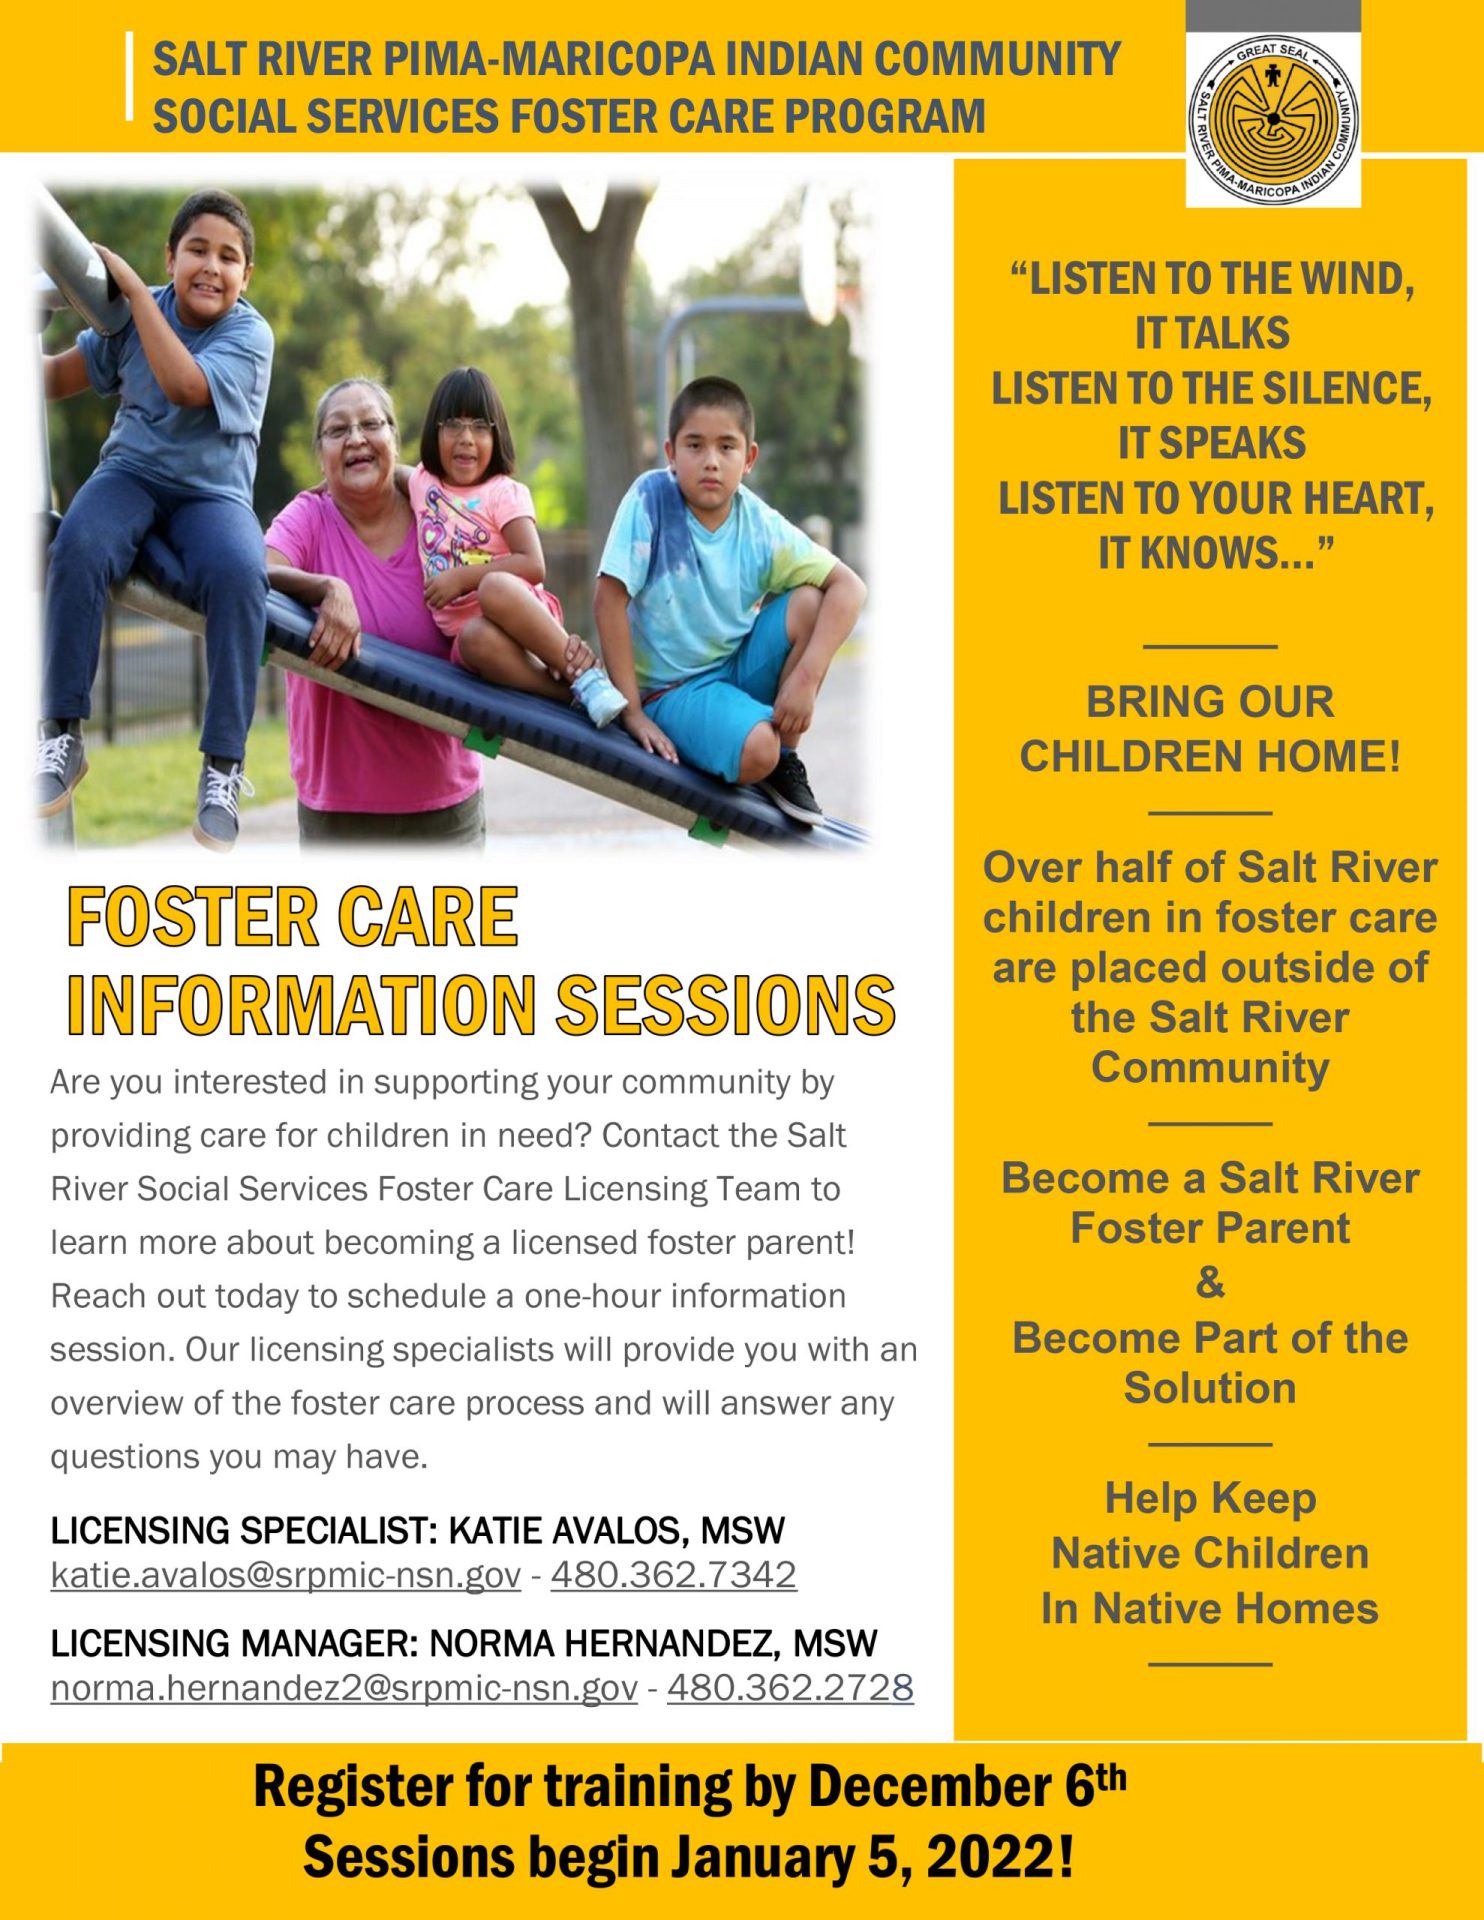 Salt River Foster Care Program Seeking Community Members to Become Foster Parents